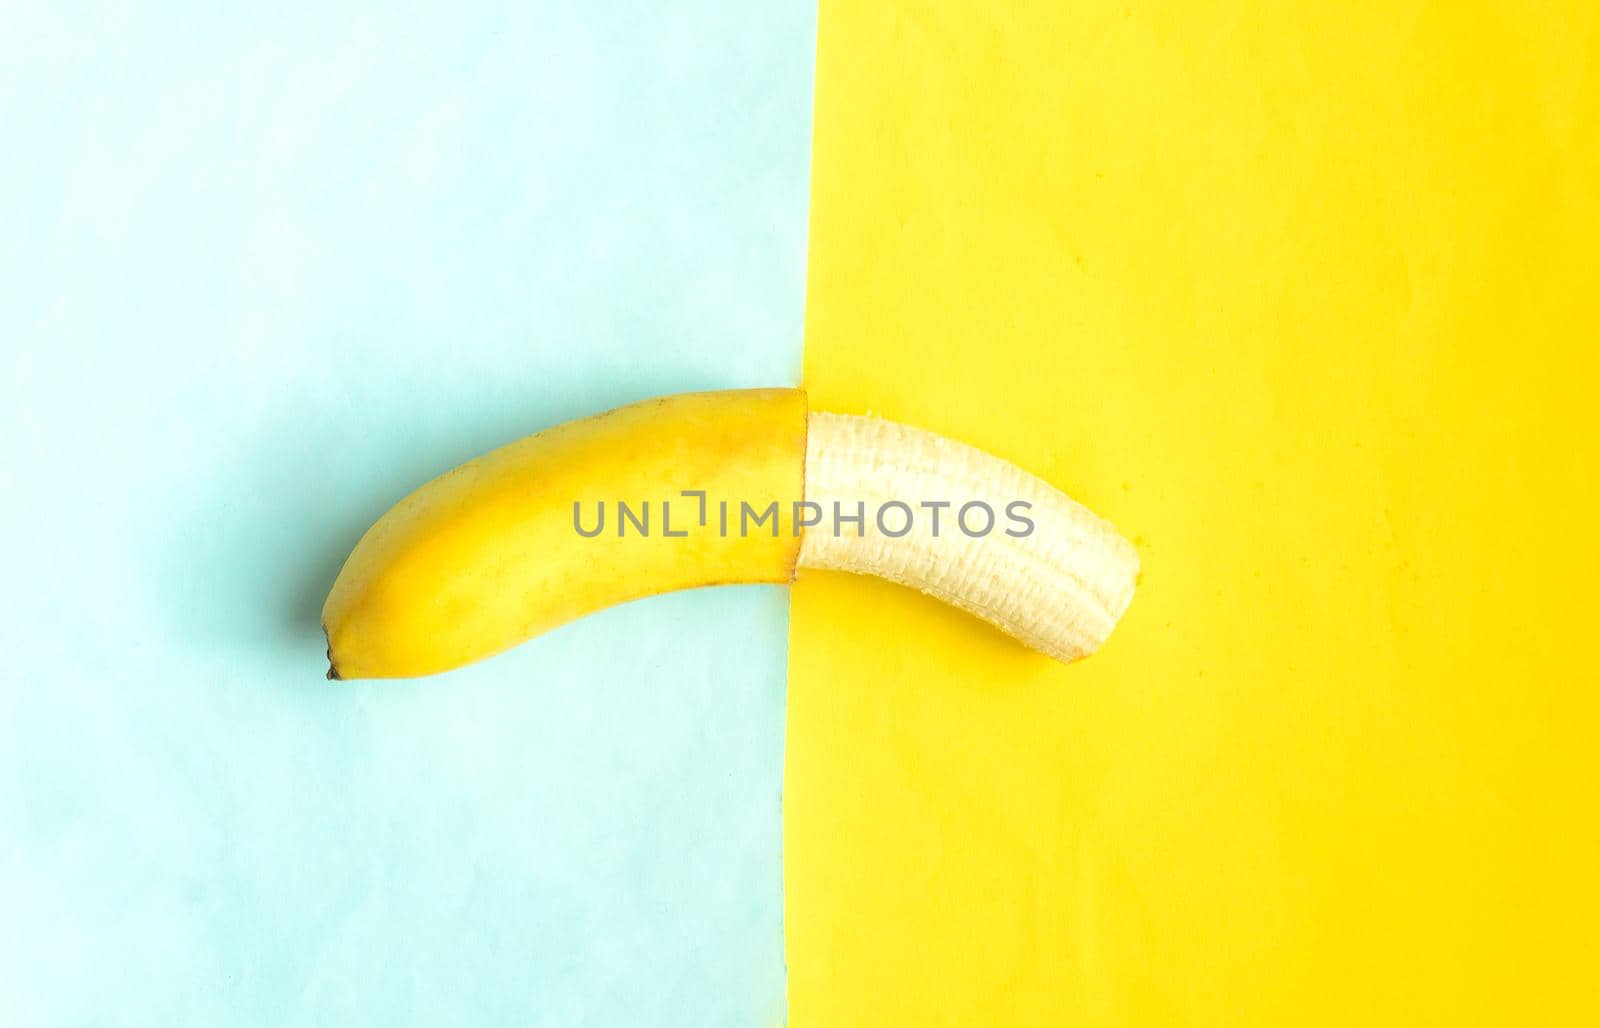 Partially peeled banana on blue yellow background.Tropic summer fruit